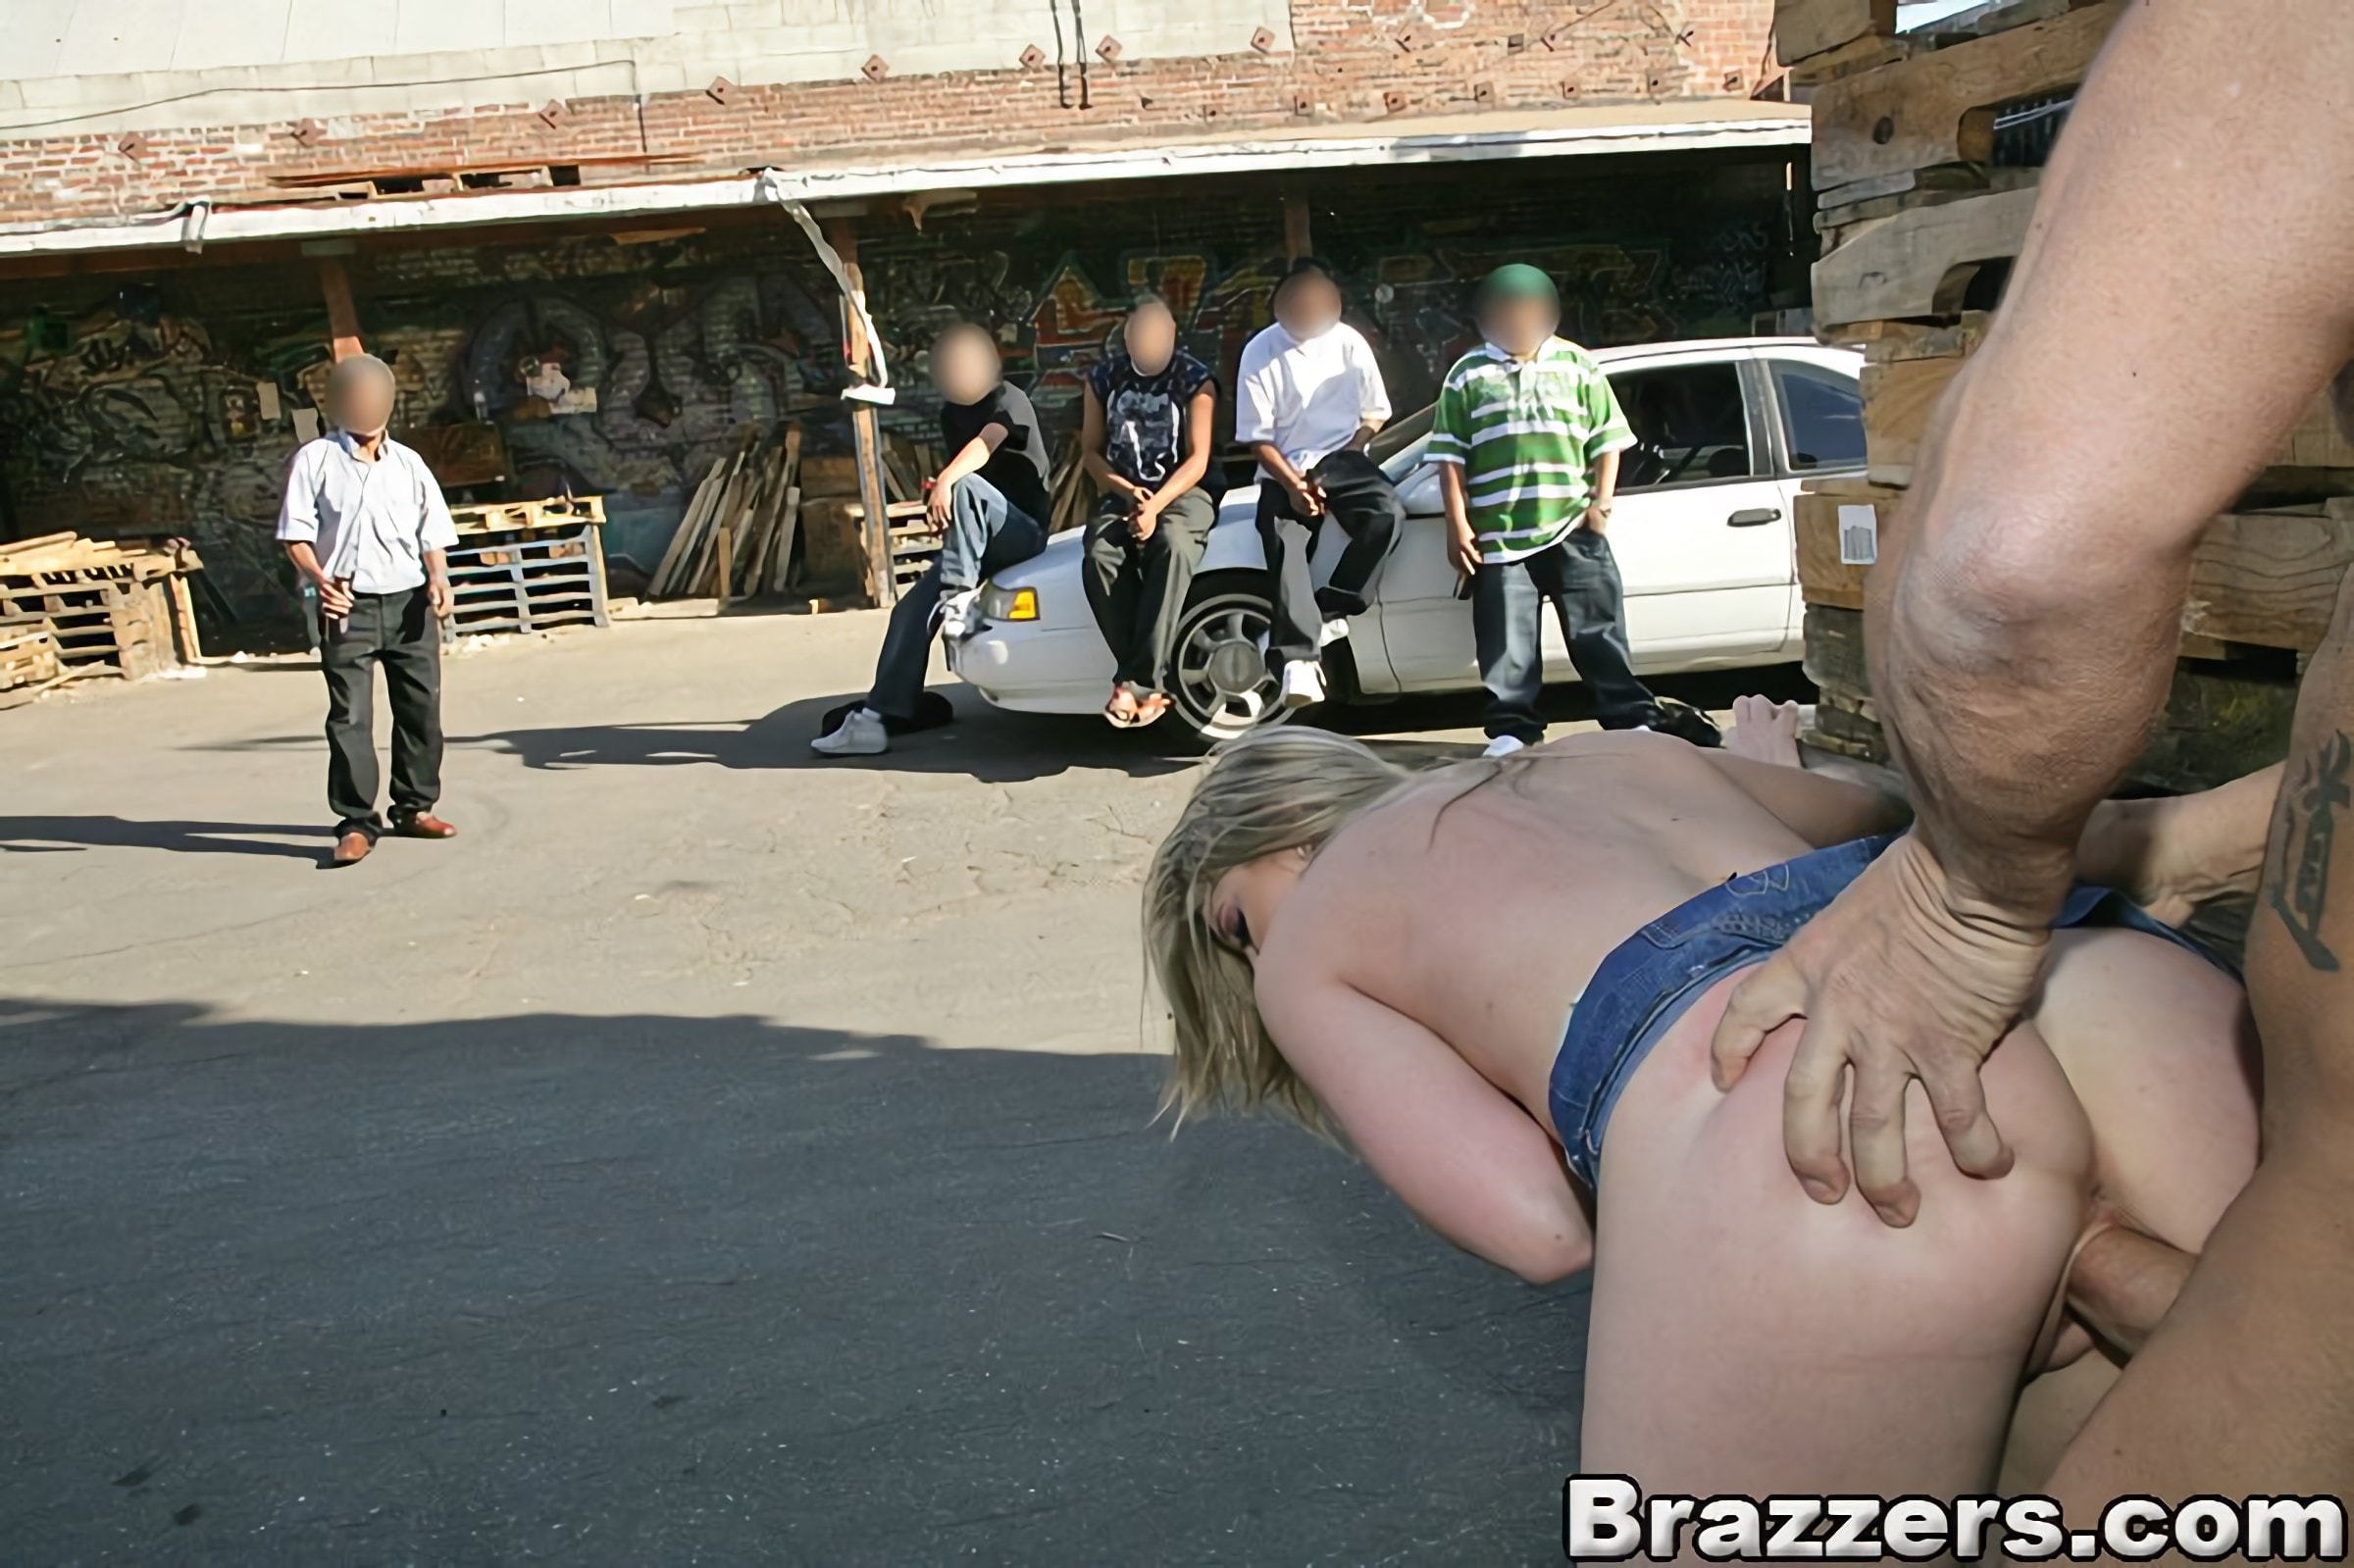 Brazzers 'Sex On A Sunny Day' starring Sunny Lane (Photo 12)